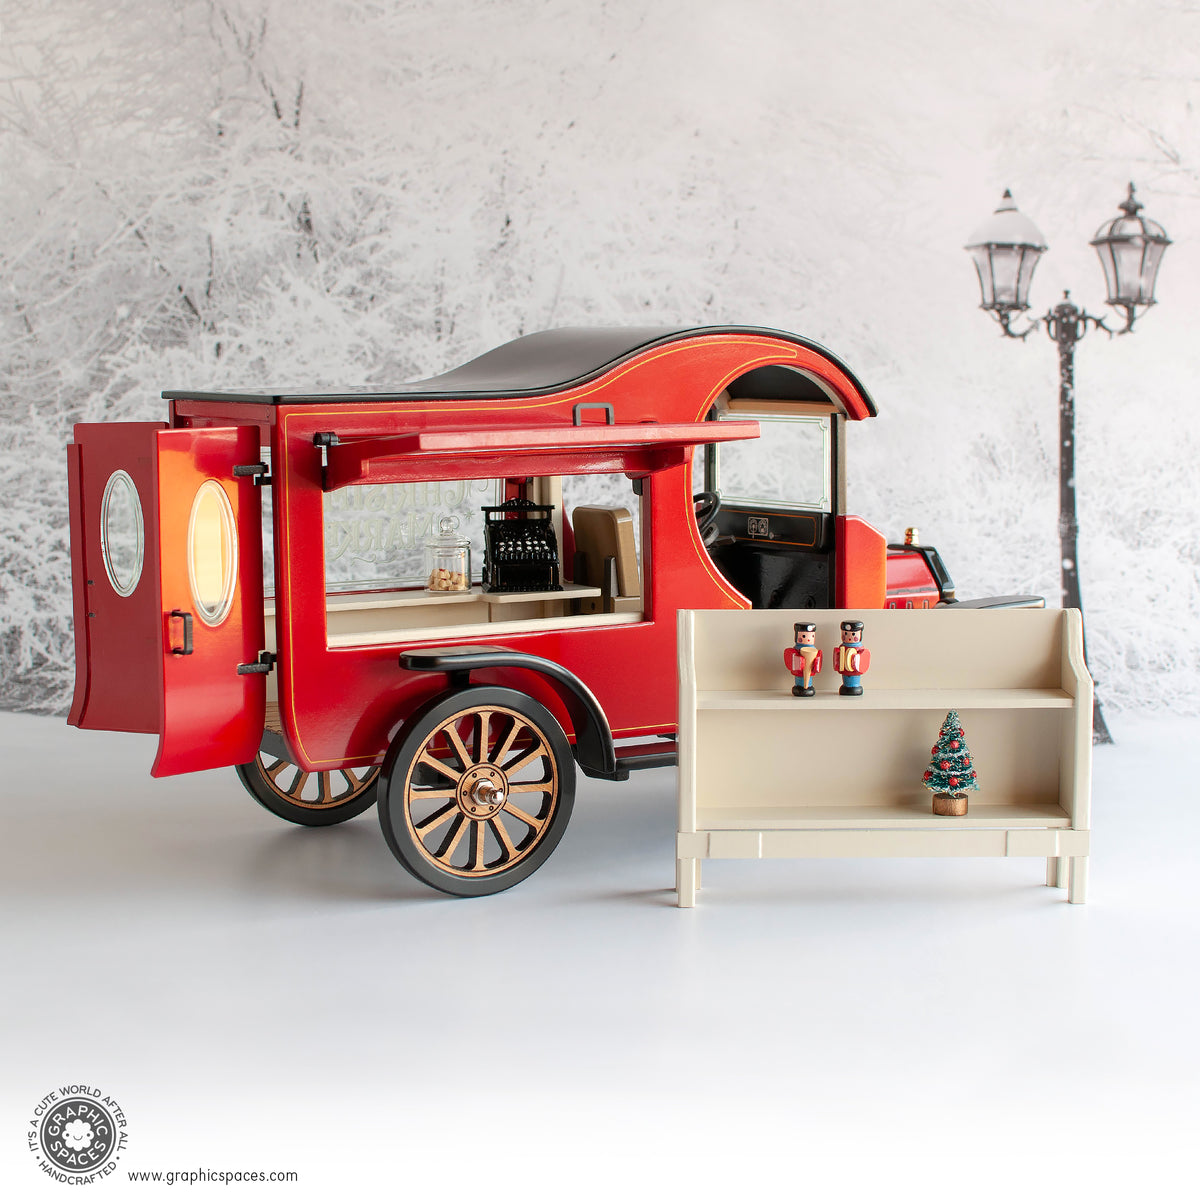 1:12 Scale Room Box Red Christmas Market Truck Model T C Cab. Passenger side see through. Uninstalled shelf. Rear doors open.